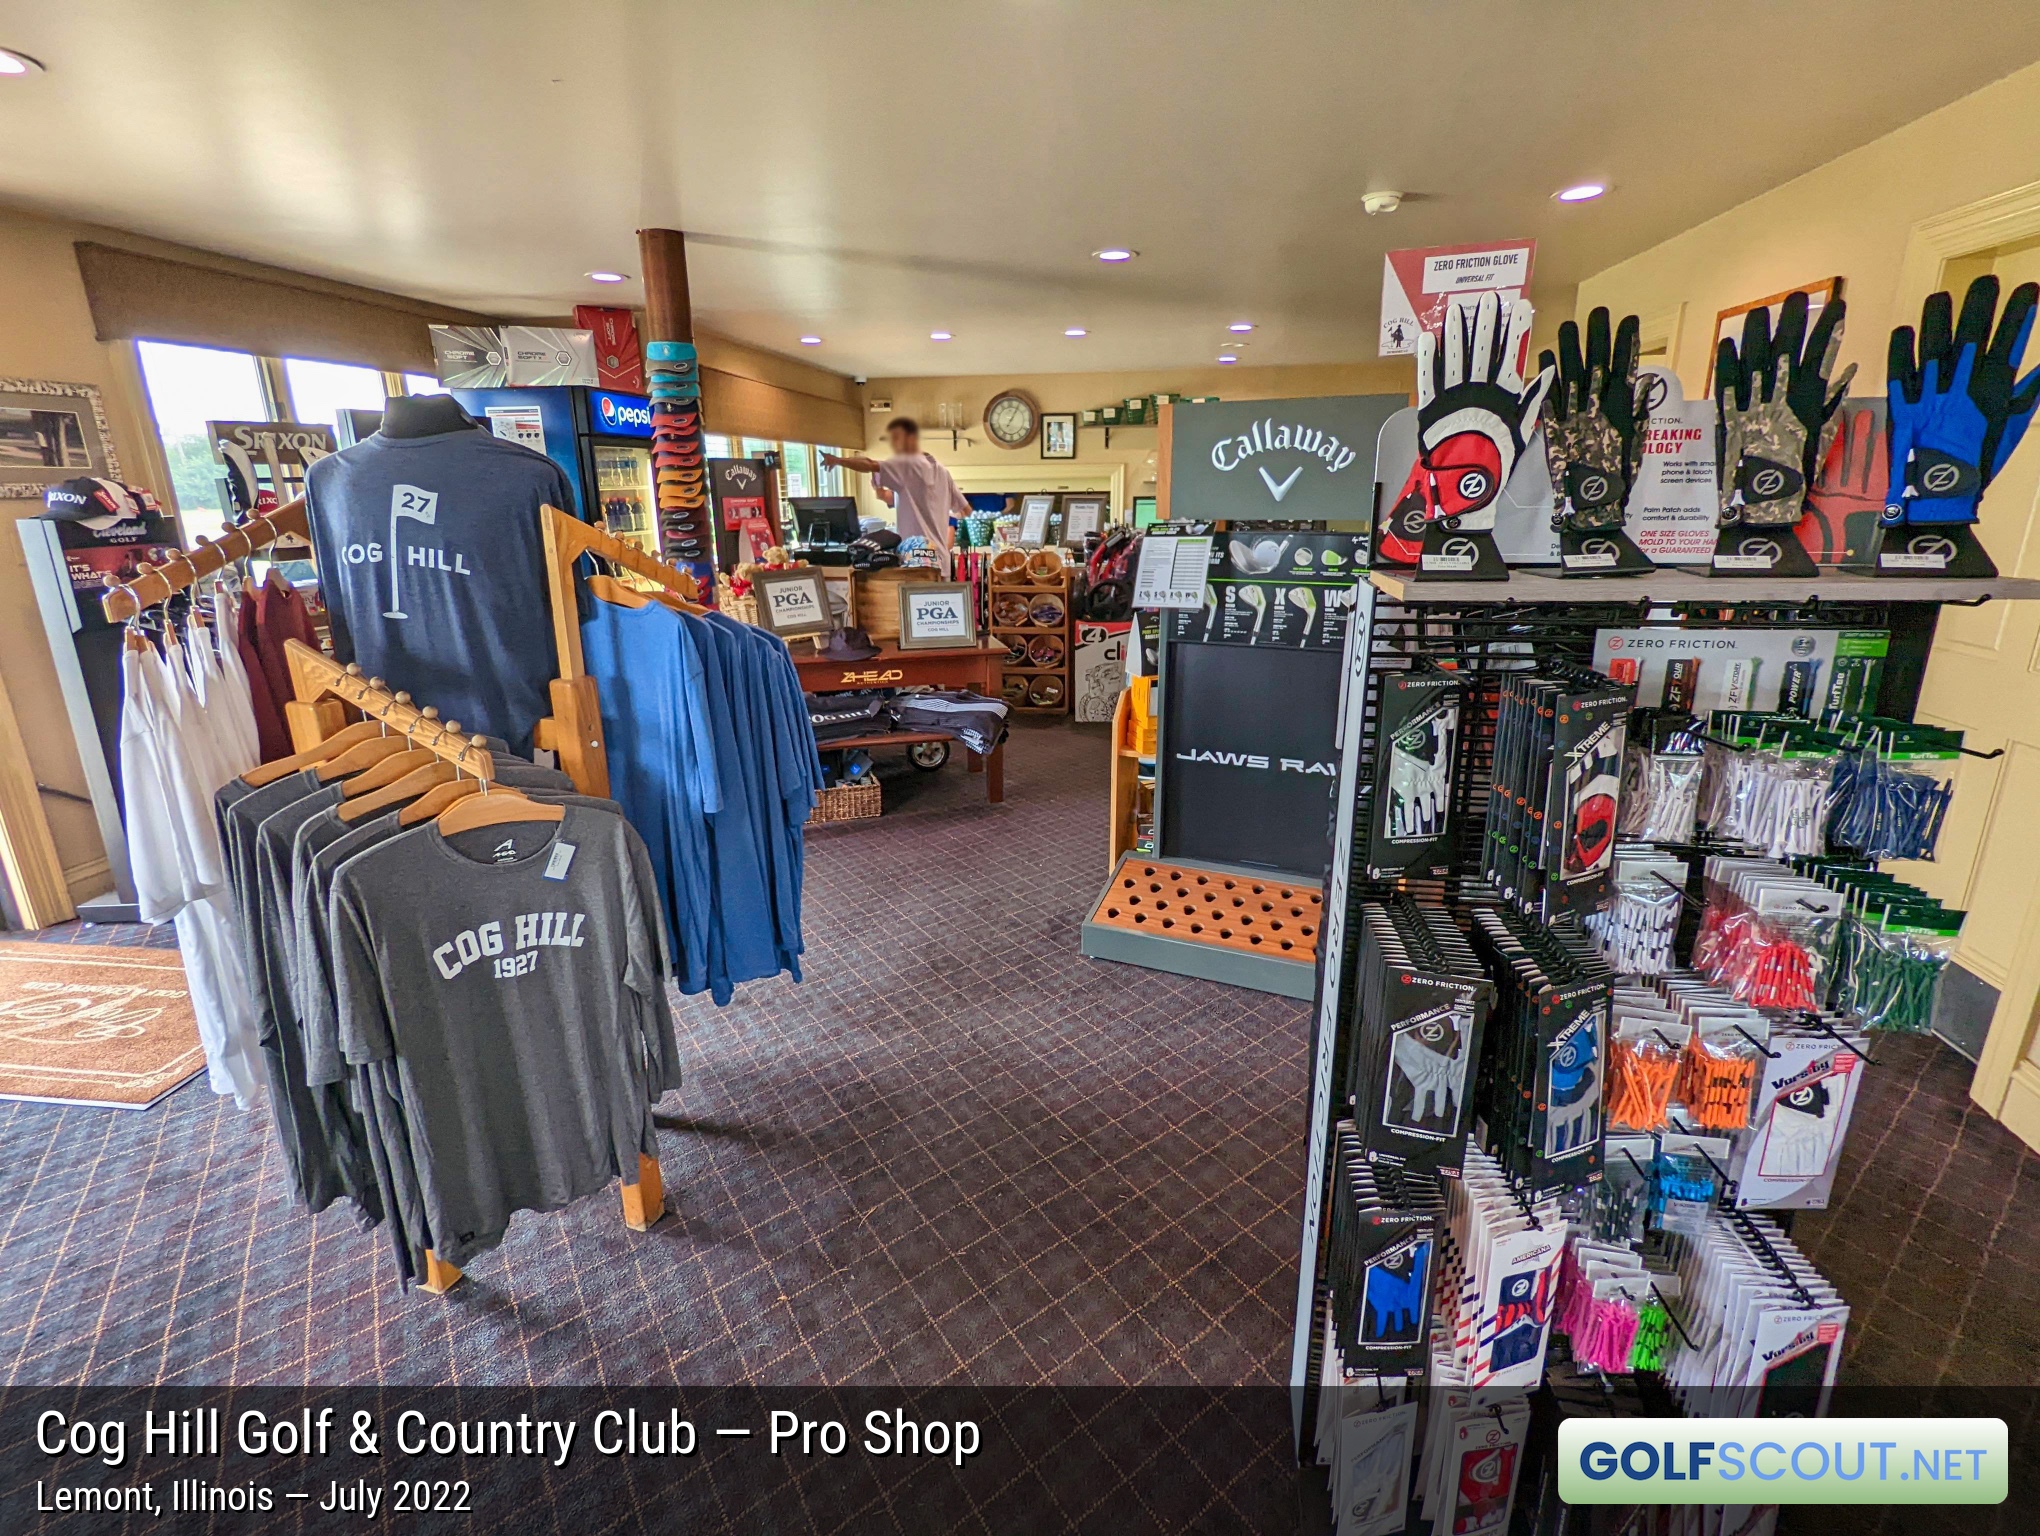 Photo of the pro shop at Cog Hill Course #3 in Lemont, Illinois. Cog Hill has three separate golf shops. This is the golf shop at the driving range.